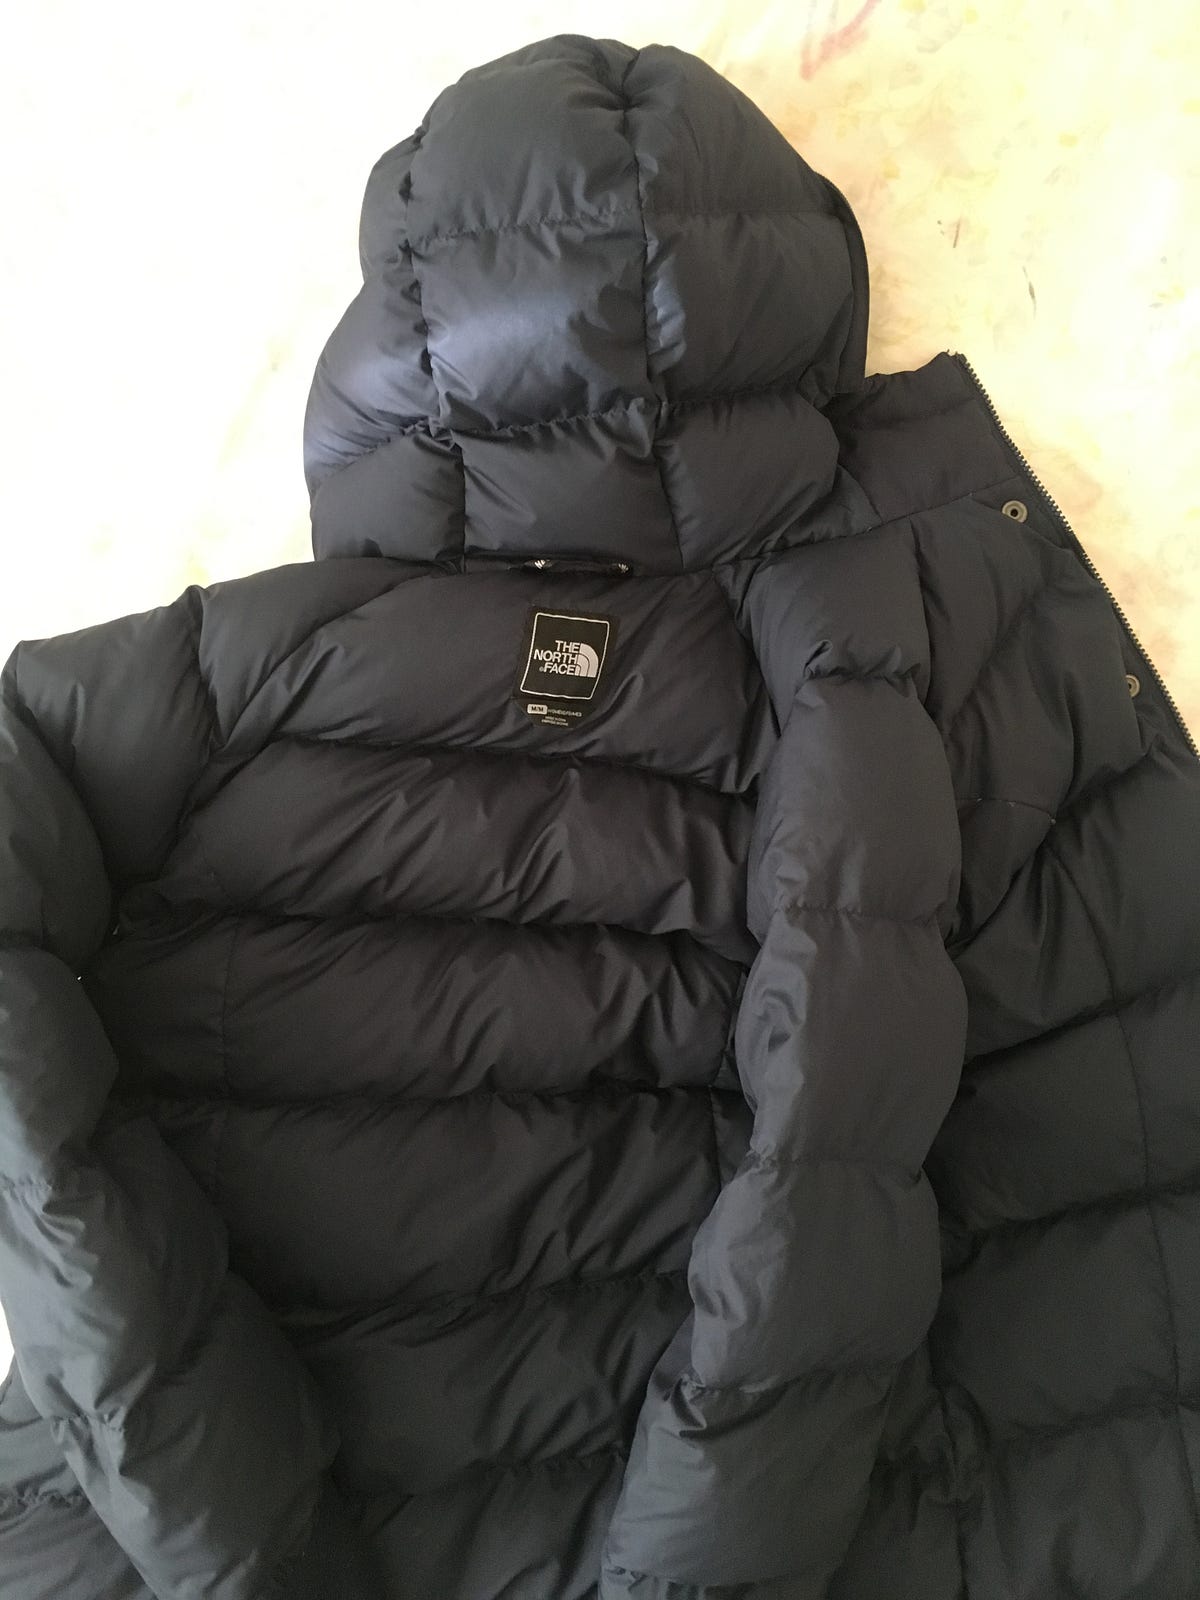 How To Wash a Down Jacket - Mainline Menswear Blog (UK)